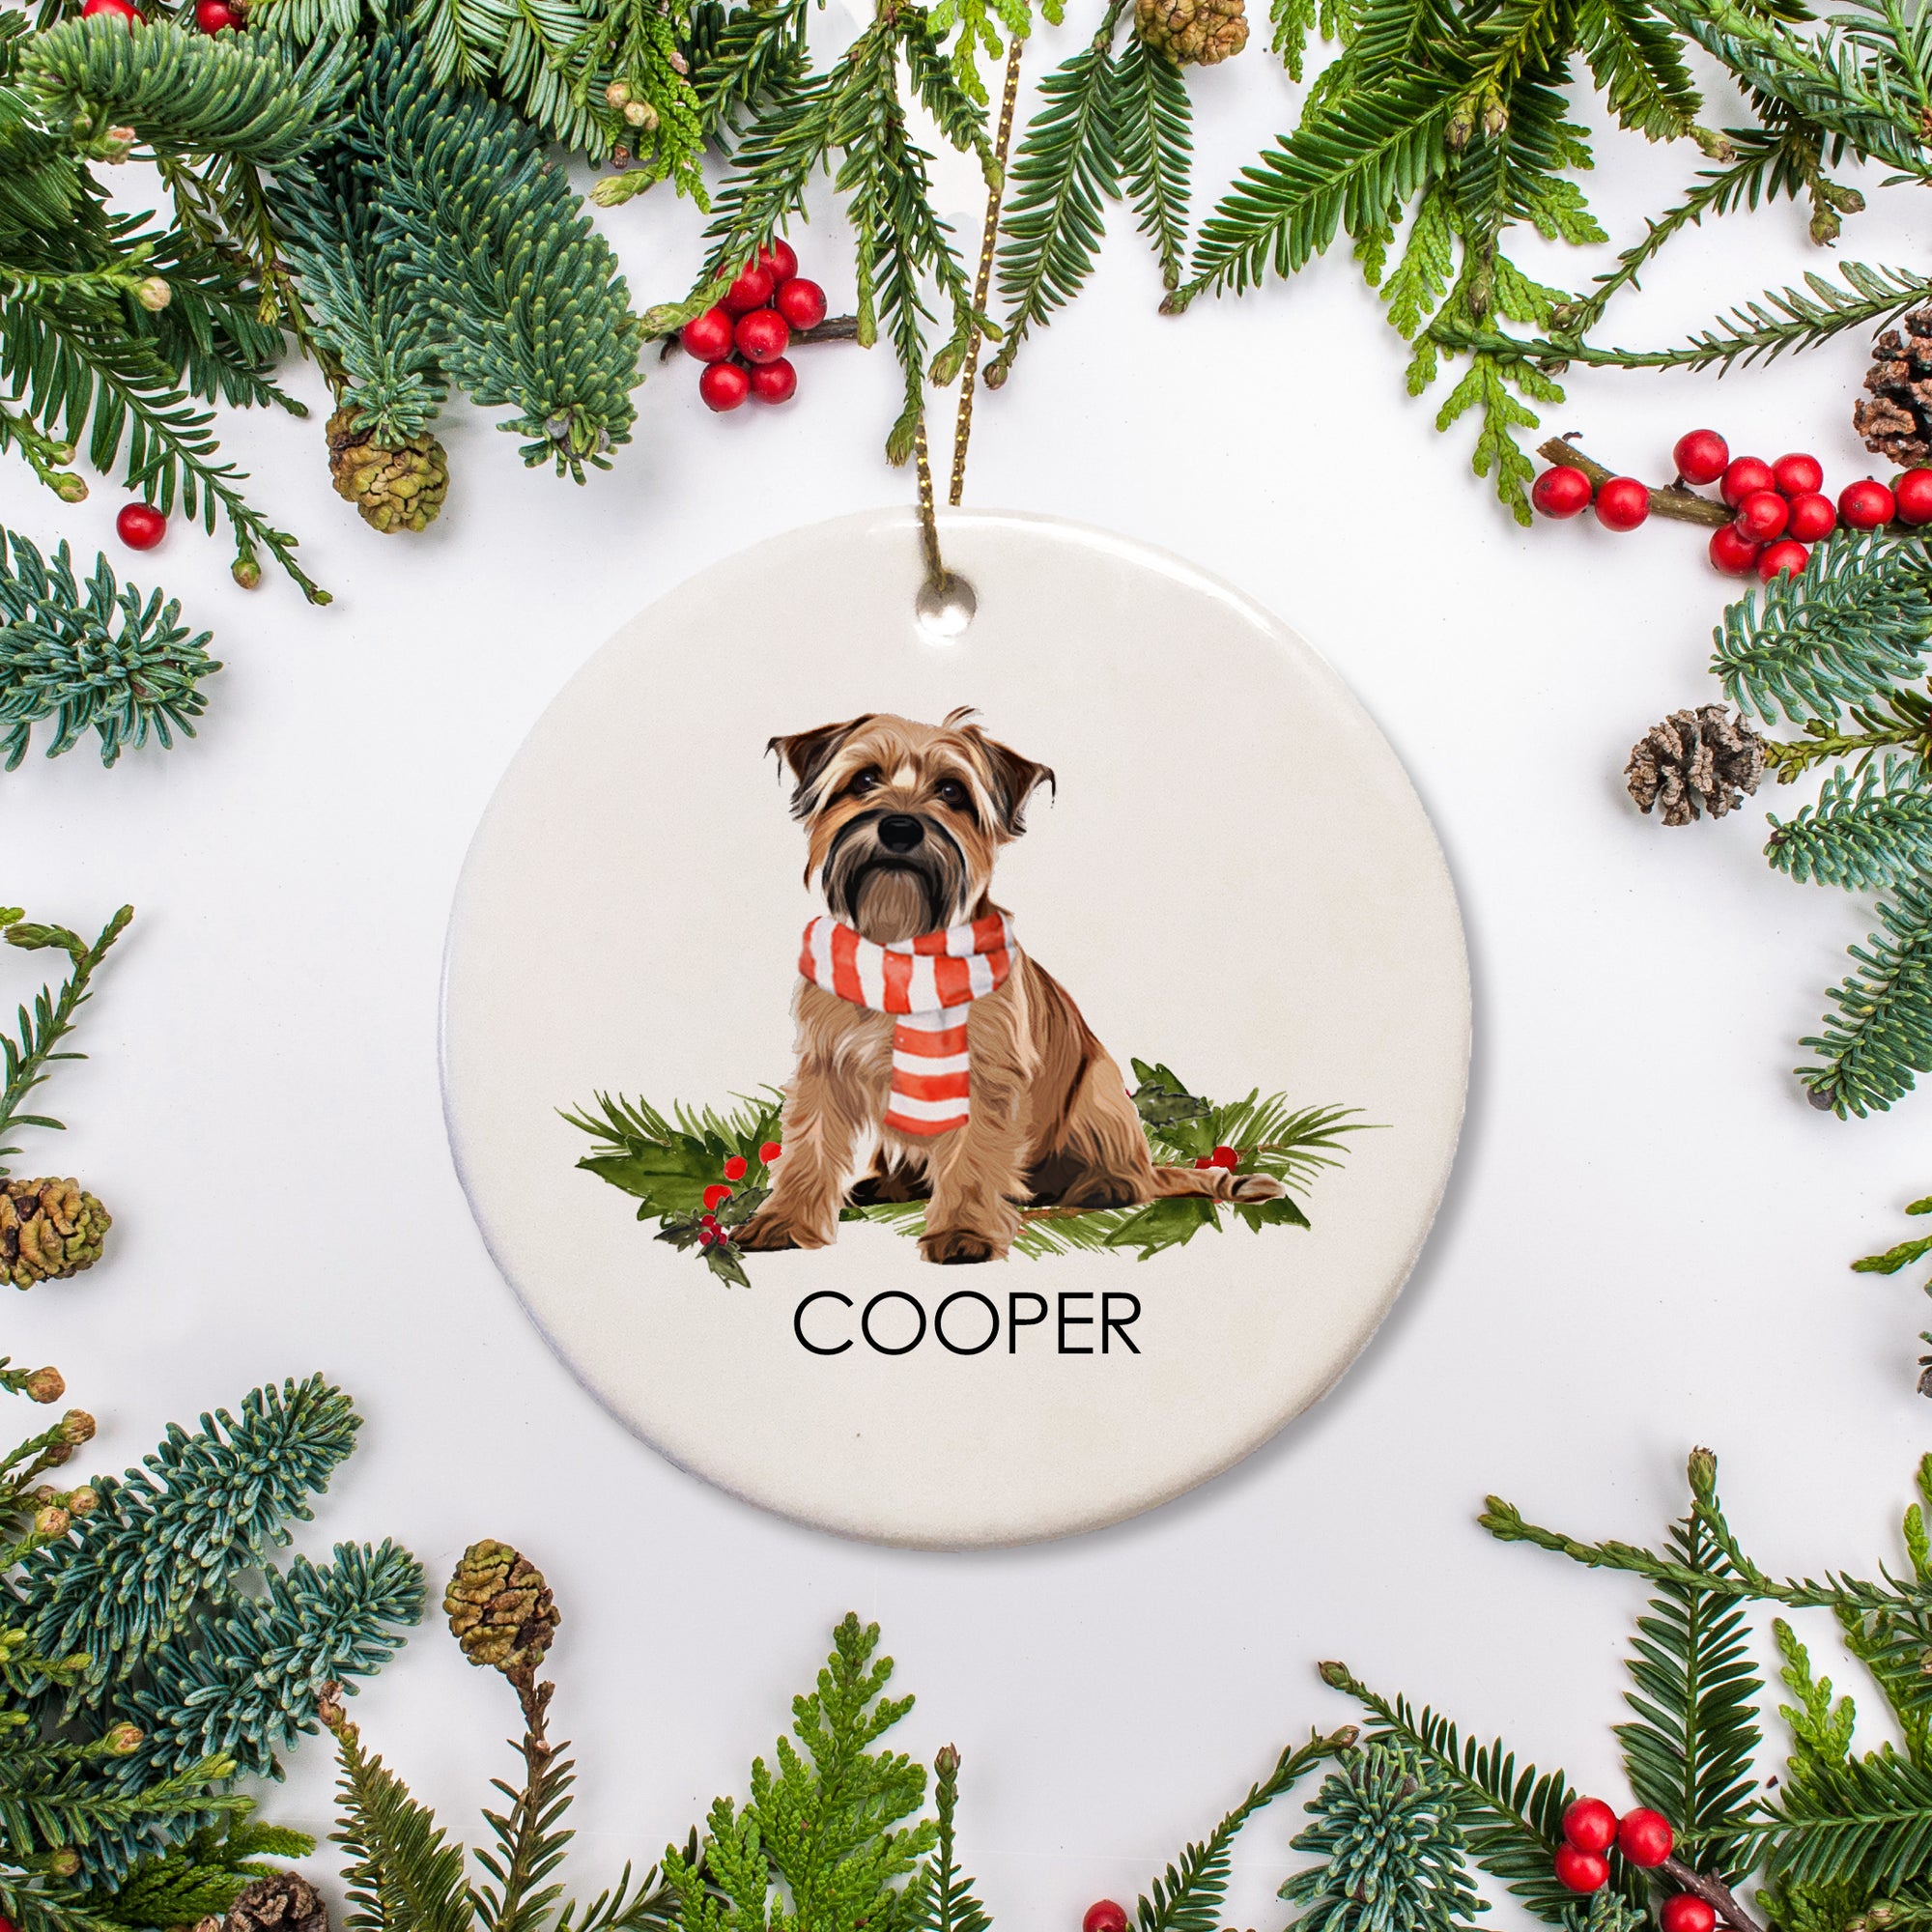 This Norfolk Terrier Christmas ornament showcases your dog, along with their name. An ideal present for pet lovers or a thoughtful memorial gift for a friend whose beloved pet has passed.